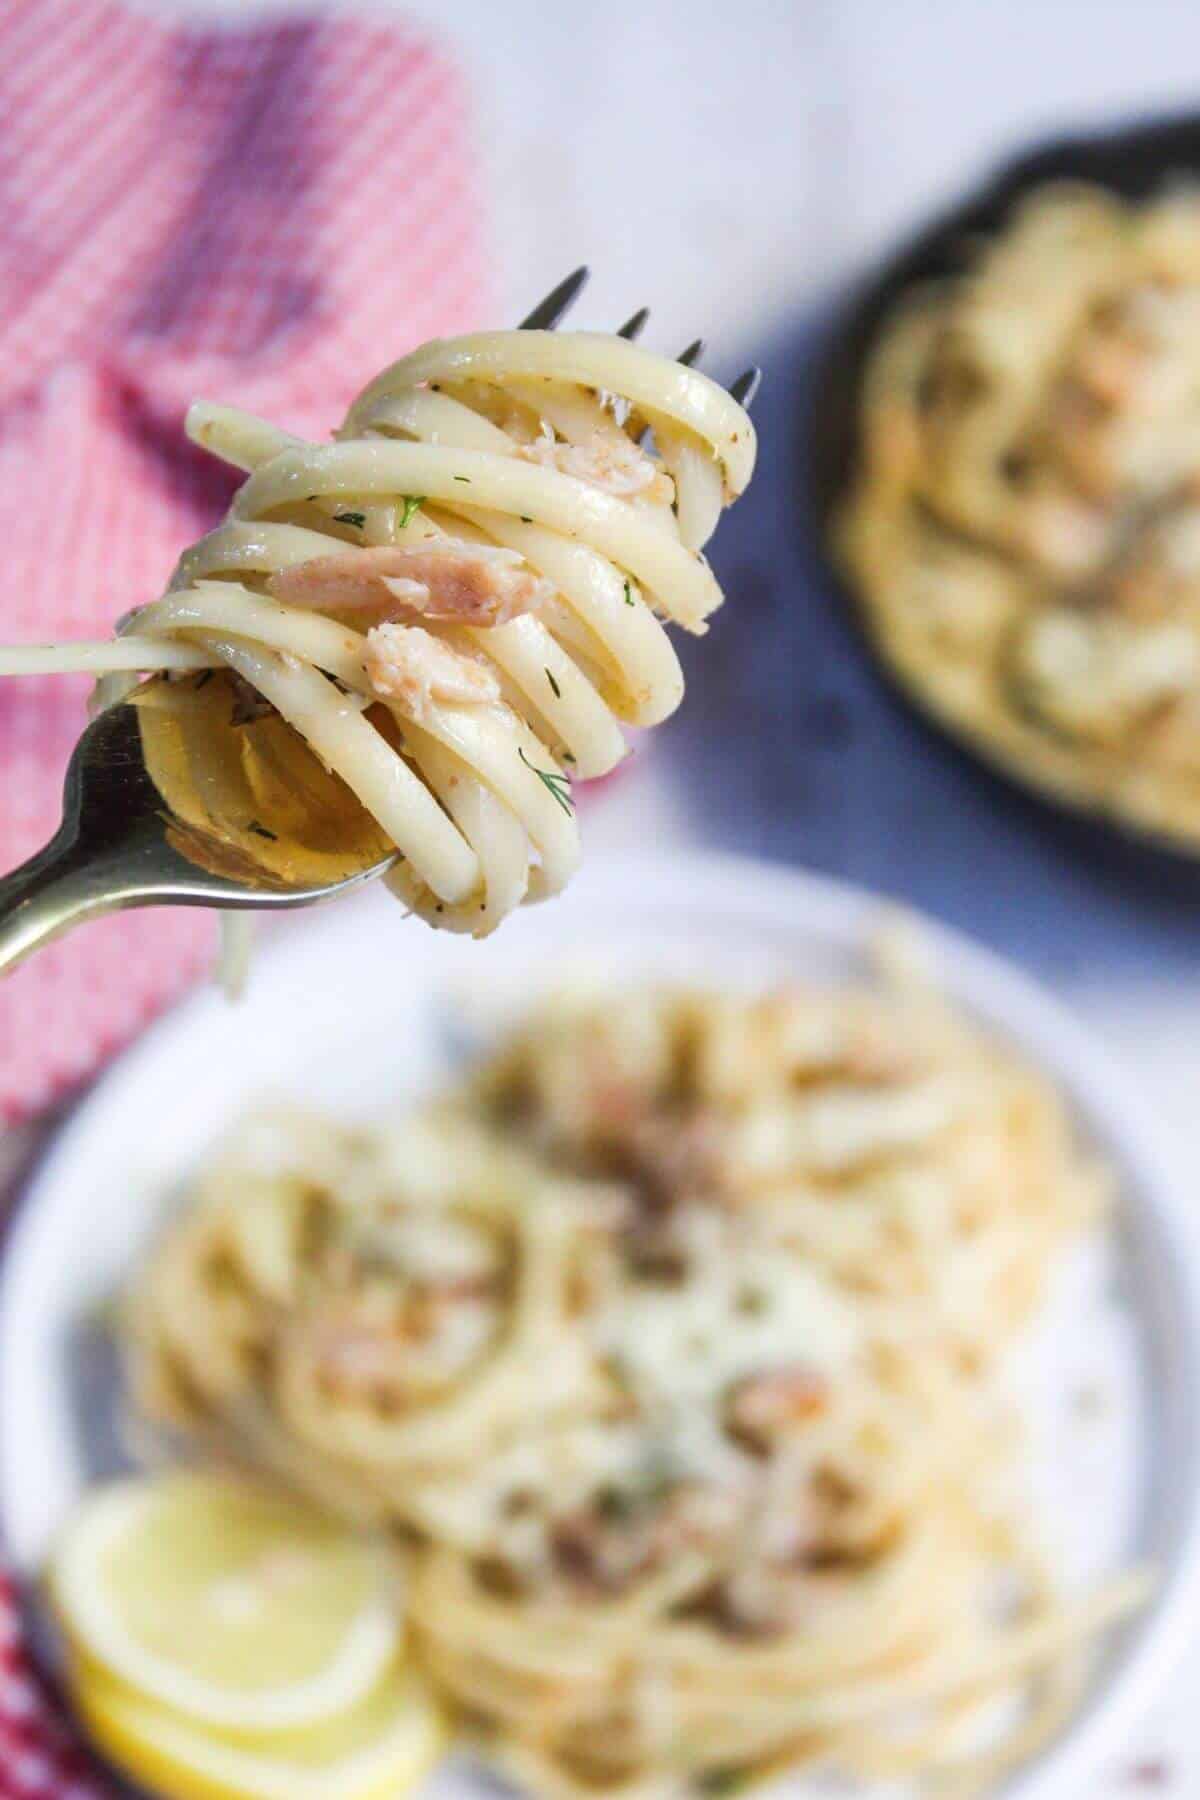 A fork twirling pasta noodles with visible pieces of crab, served on a blurred background with more pasta dishes.